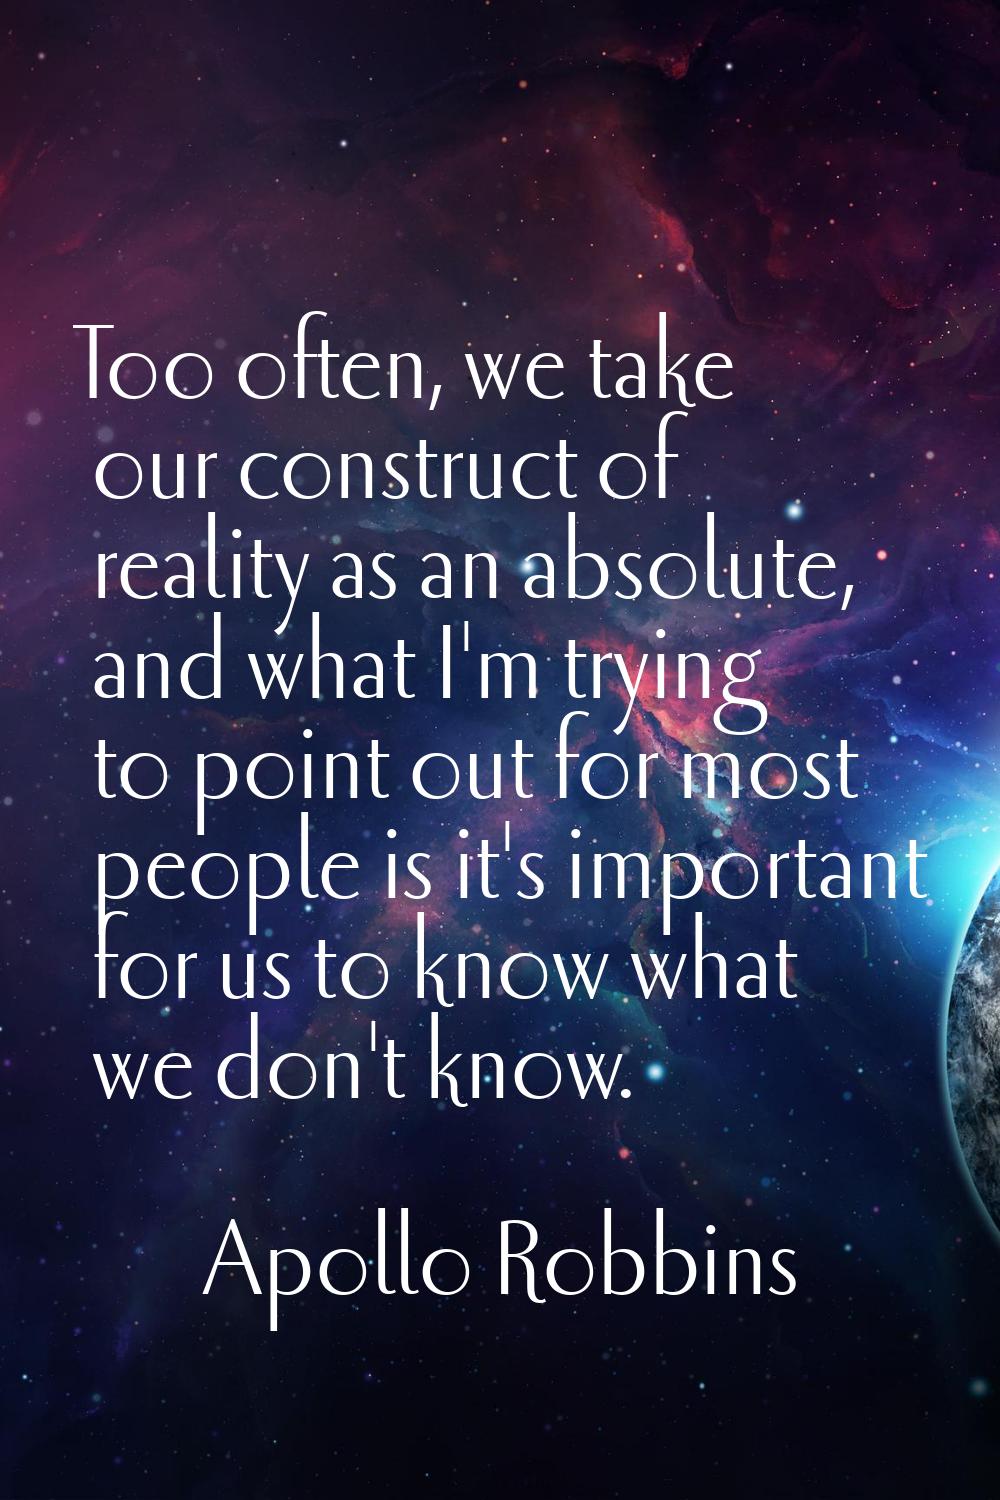 Too often, we take our construct of reality as an absolute, and what I'm trying to point out for mo